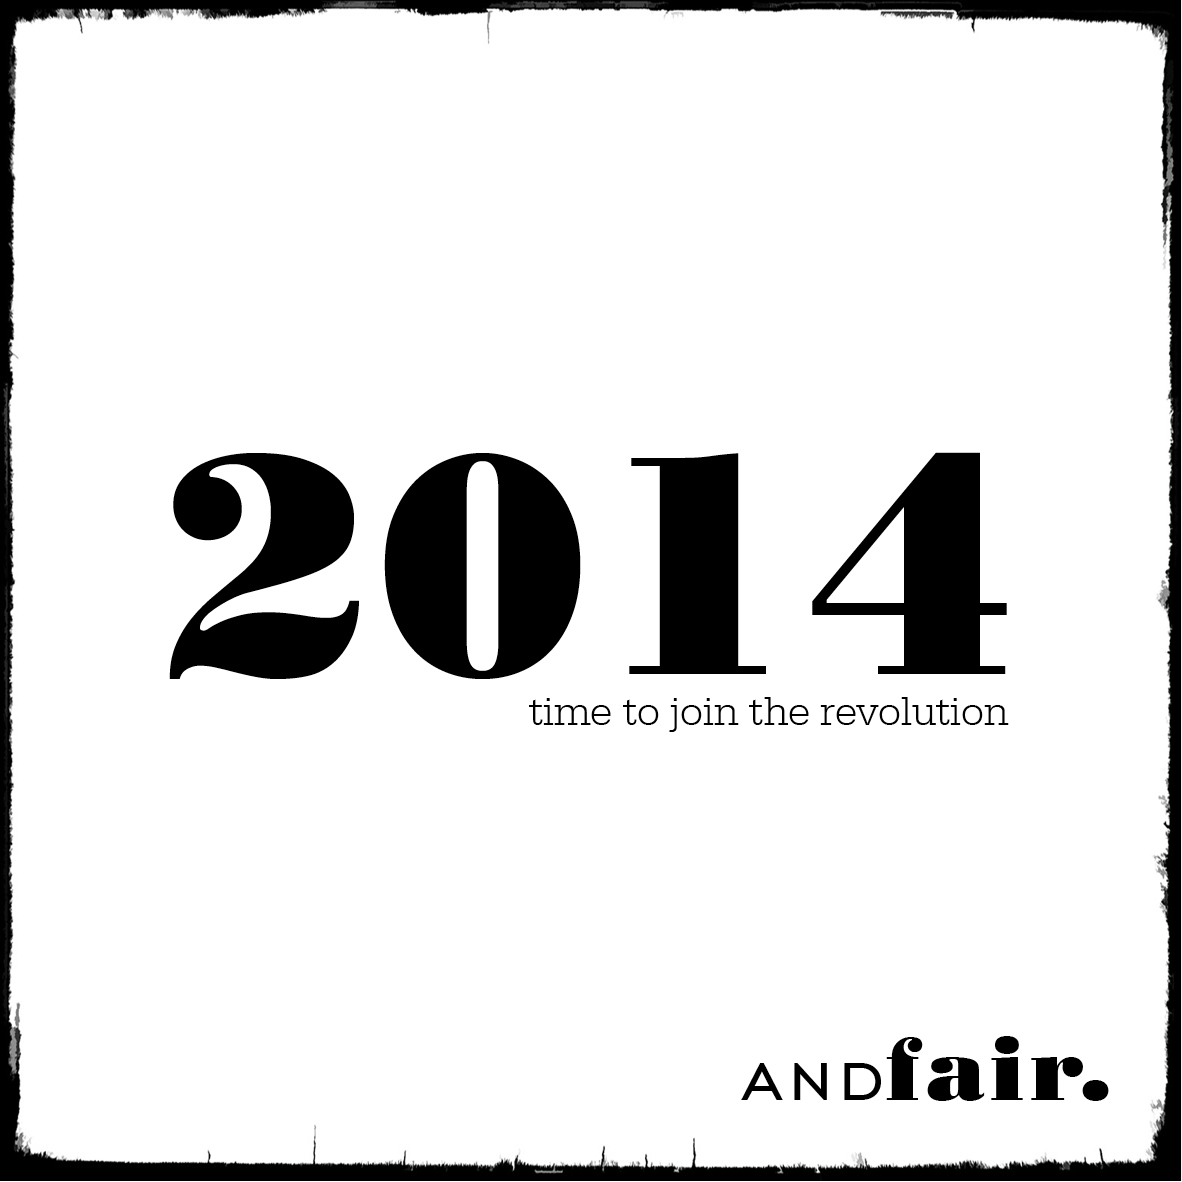 2014 time to join the revolution